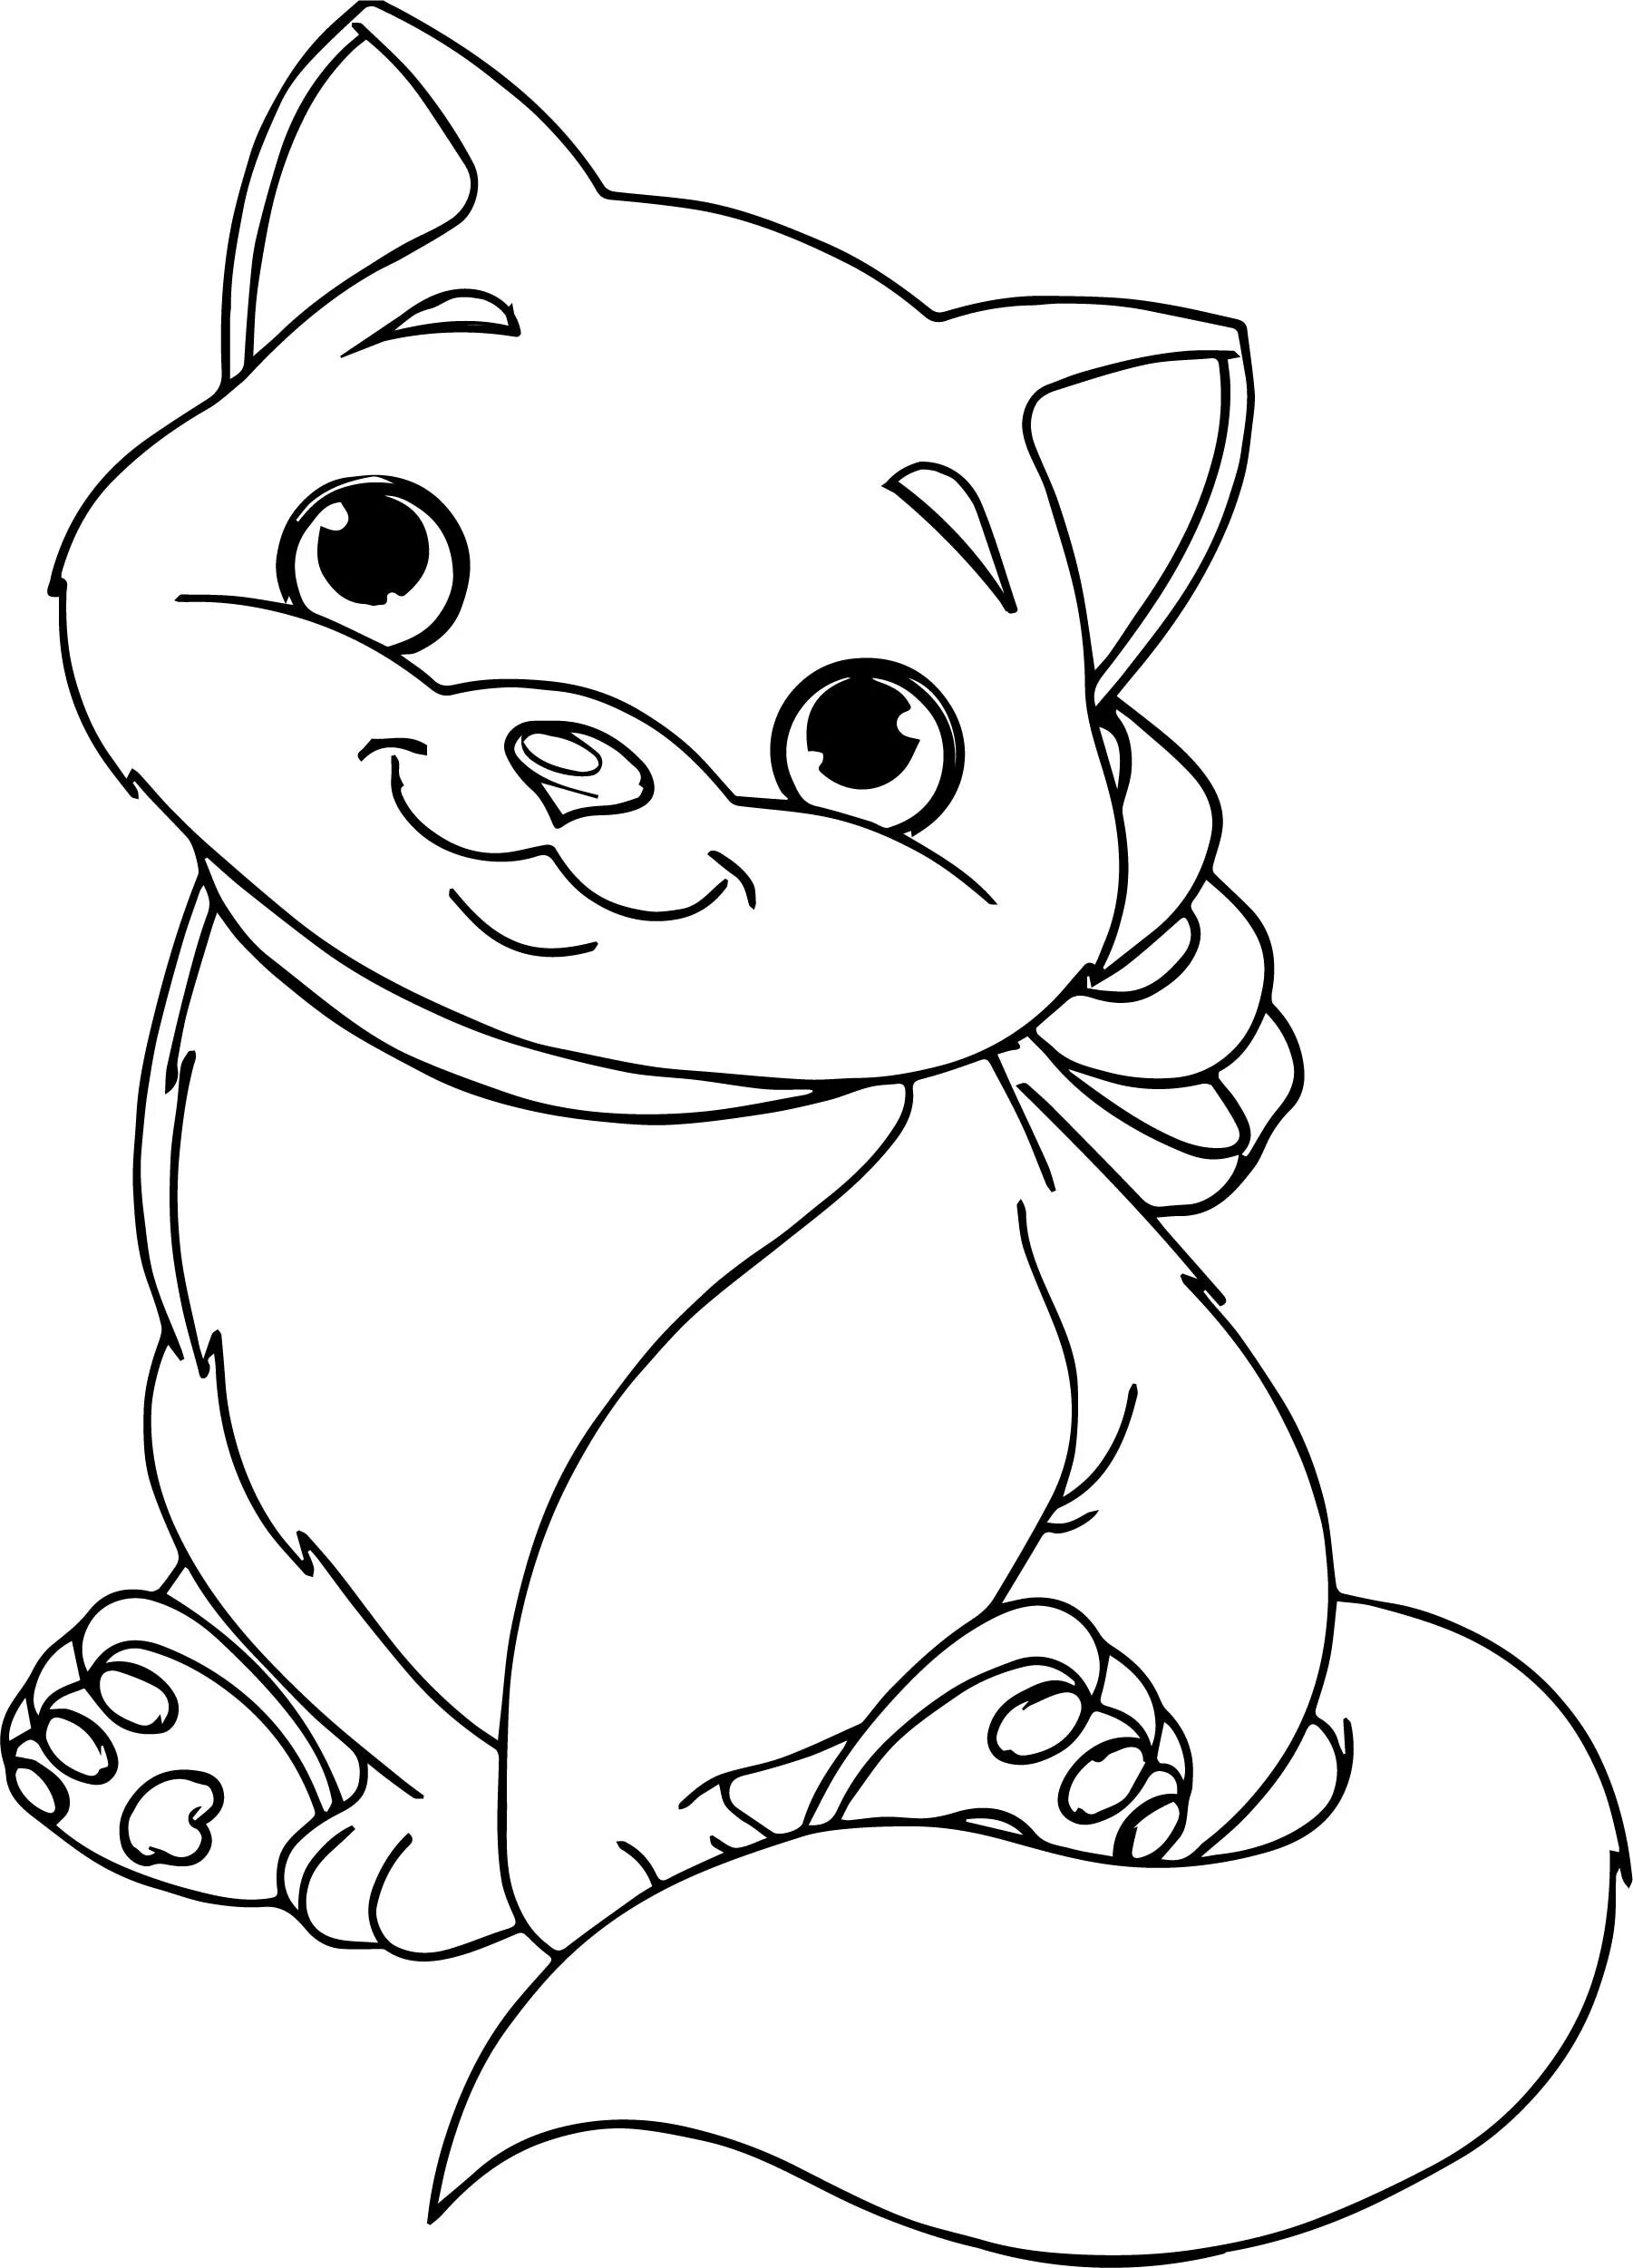 Bright and lively coloring of cats for children